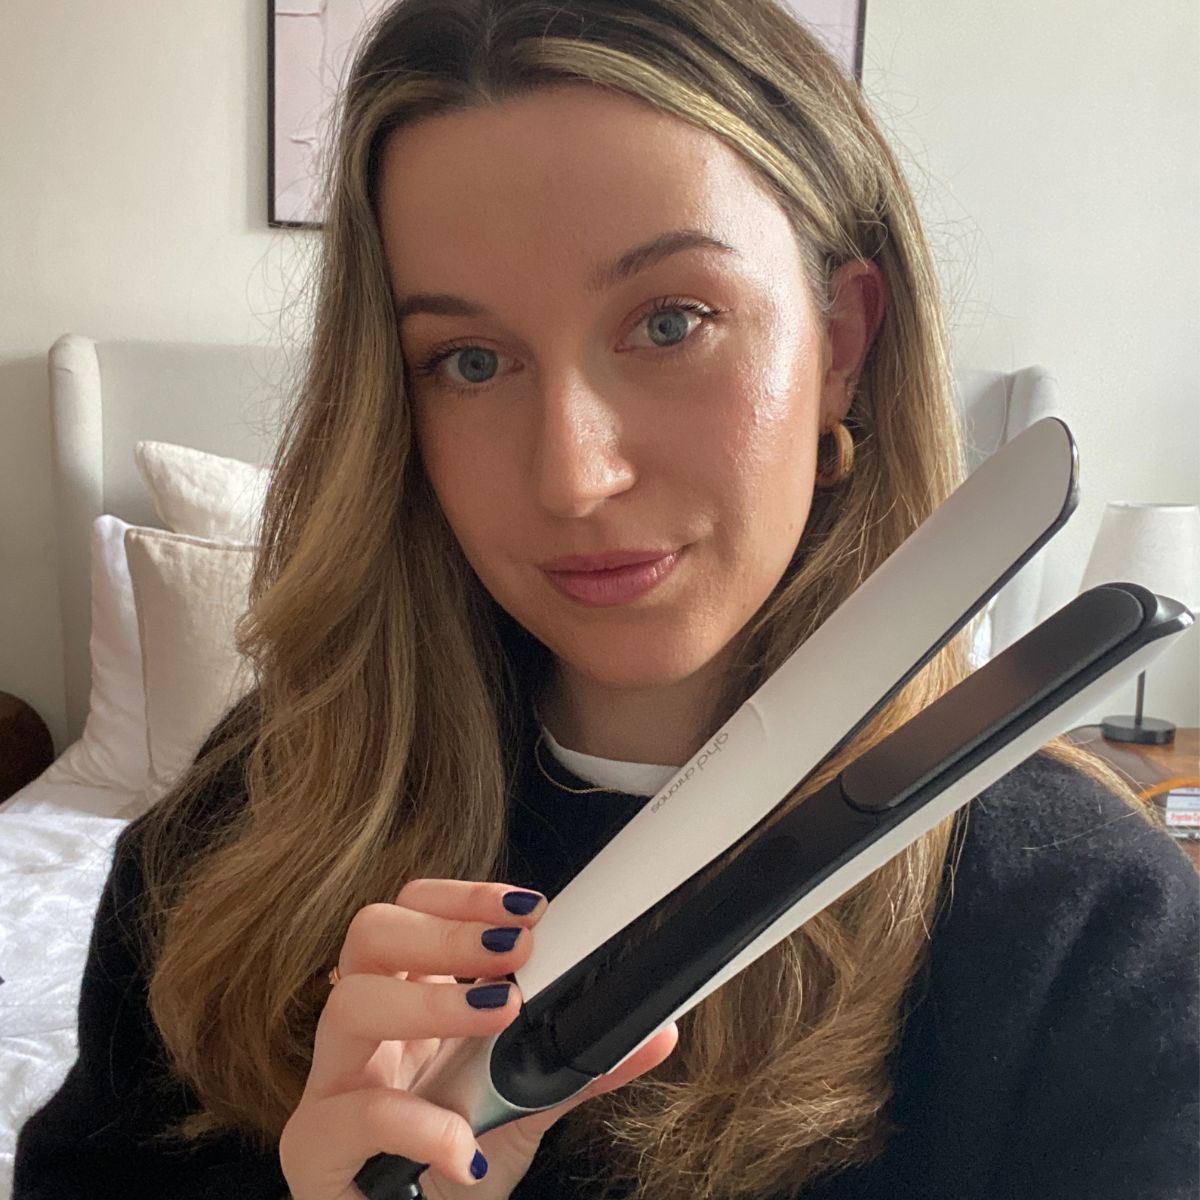 An Honest Review of the New GHD Chronos Hair Straightener